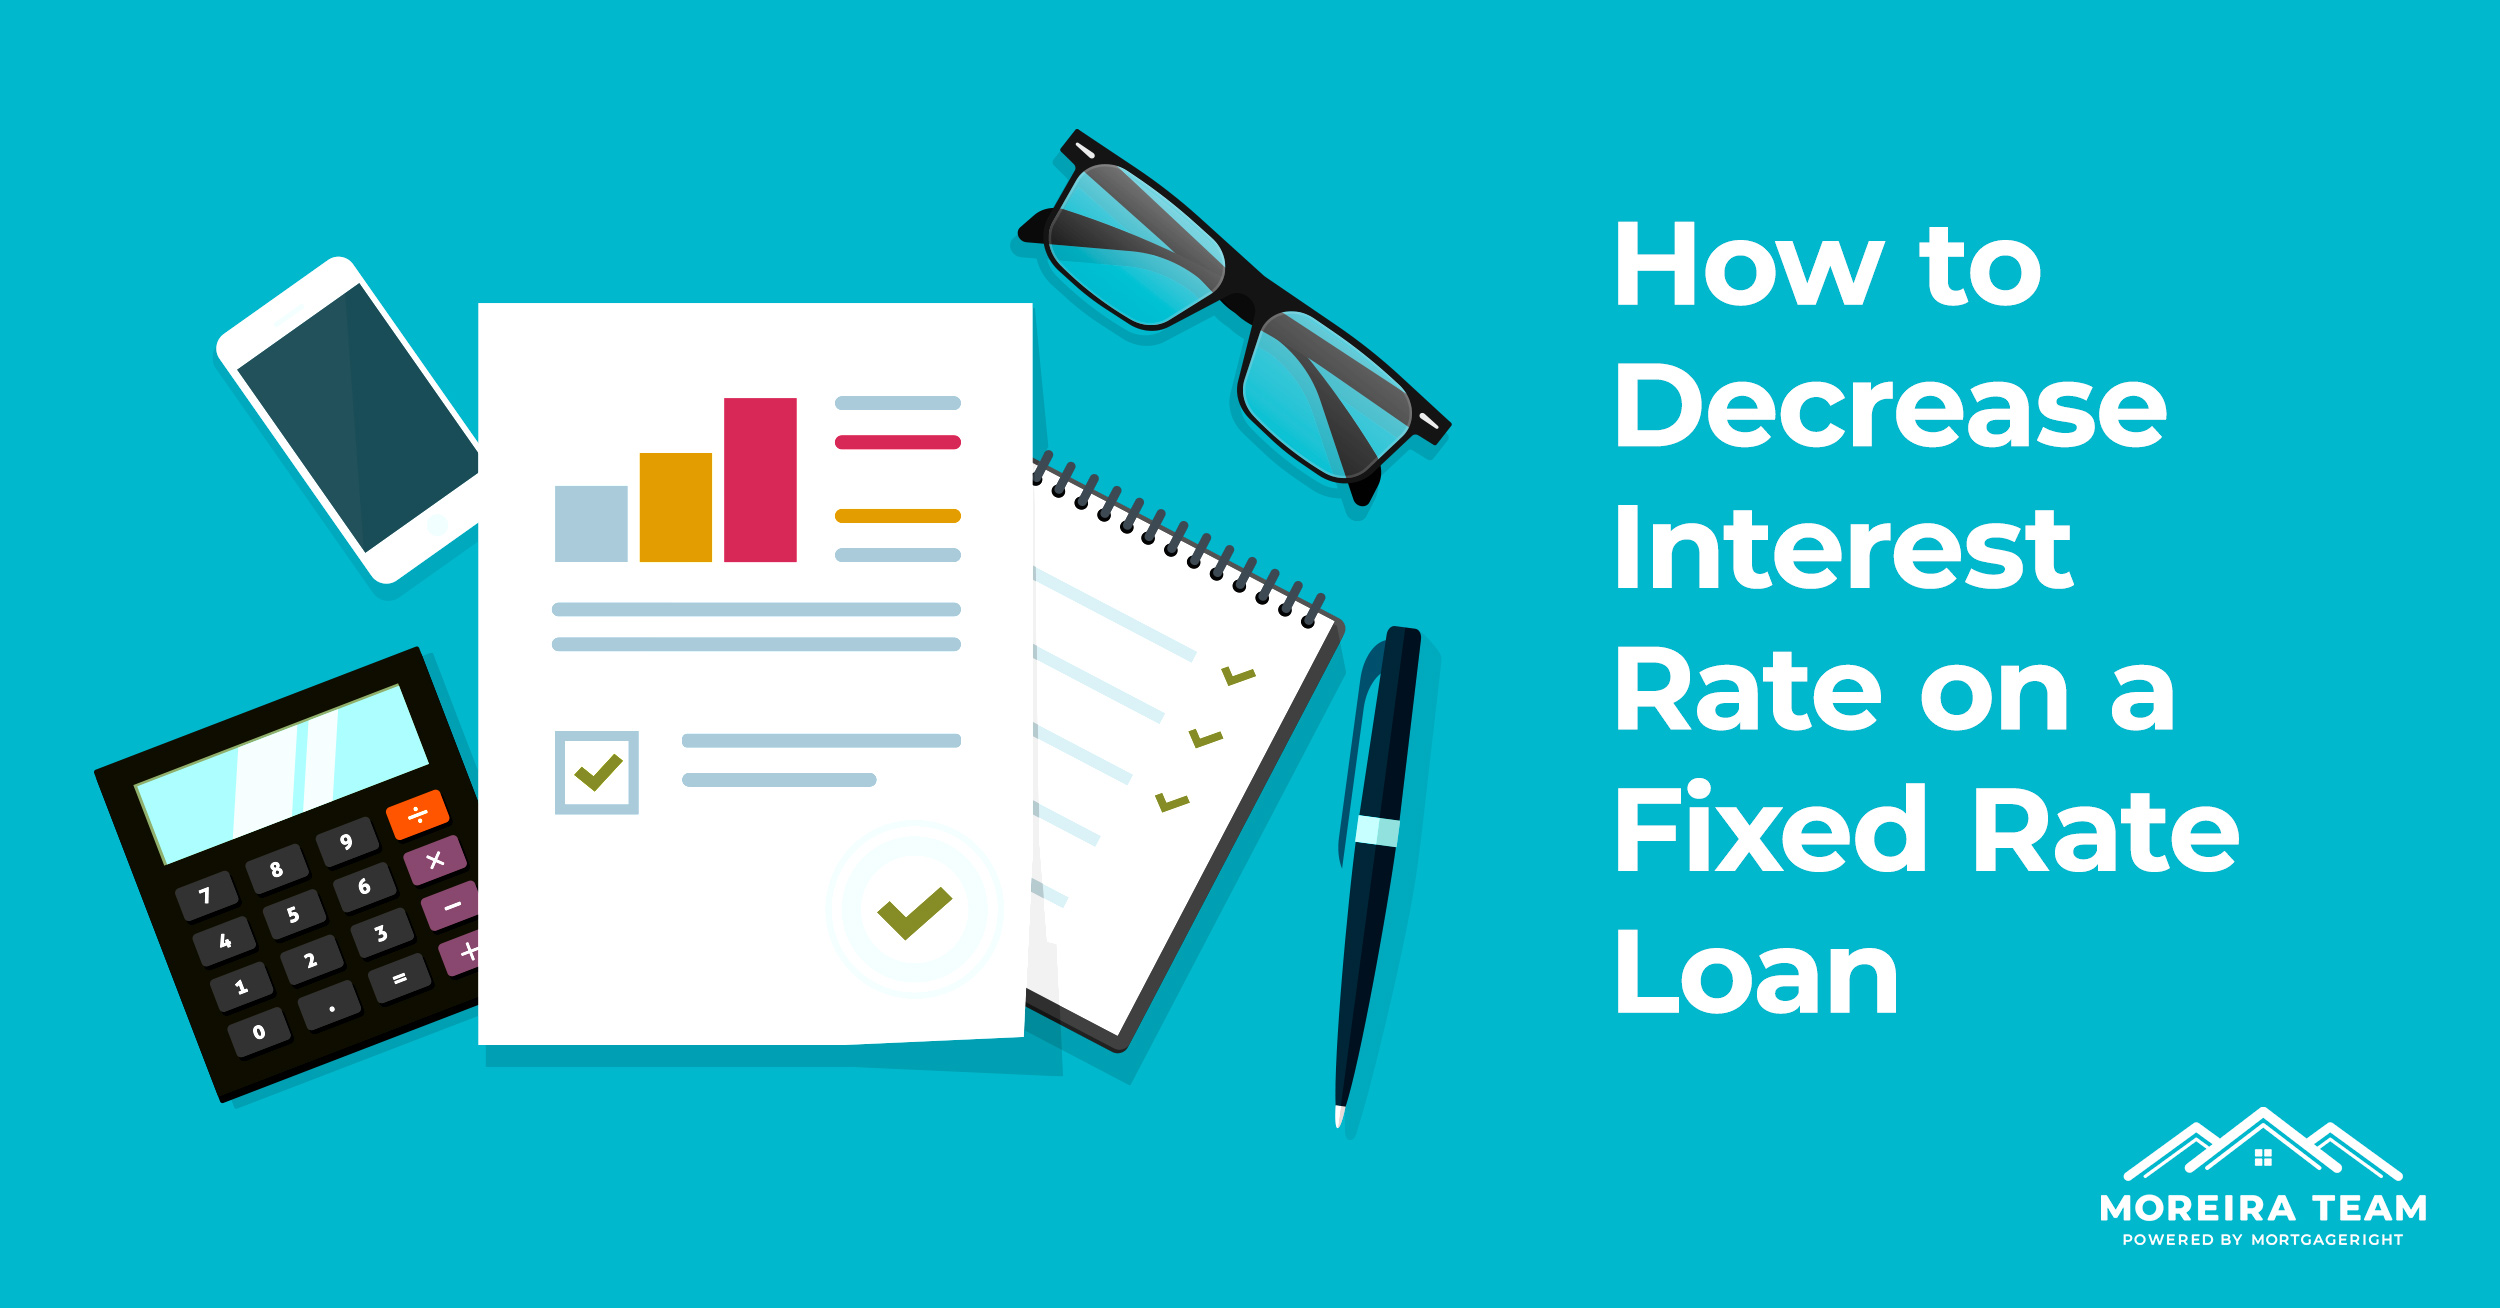 How to Decrease Your Interest Rate on a Fixed Rate Loan